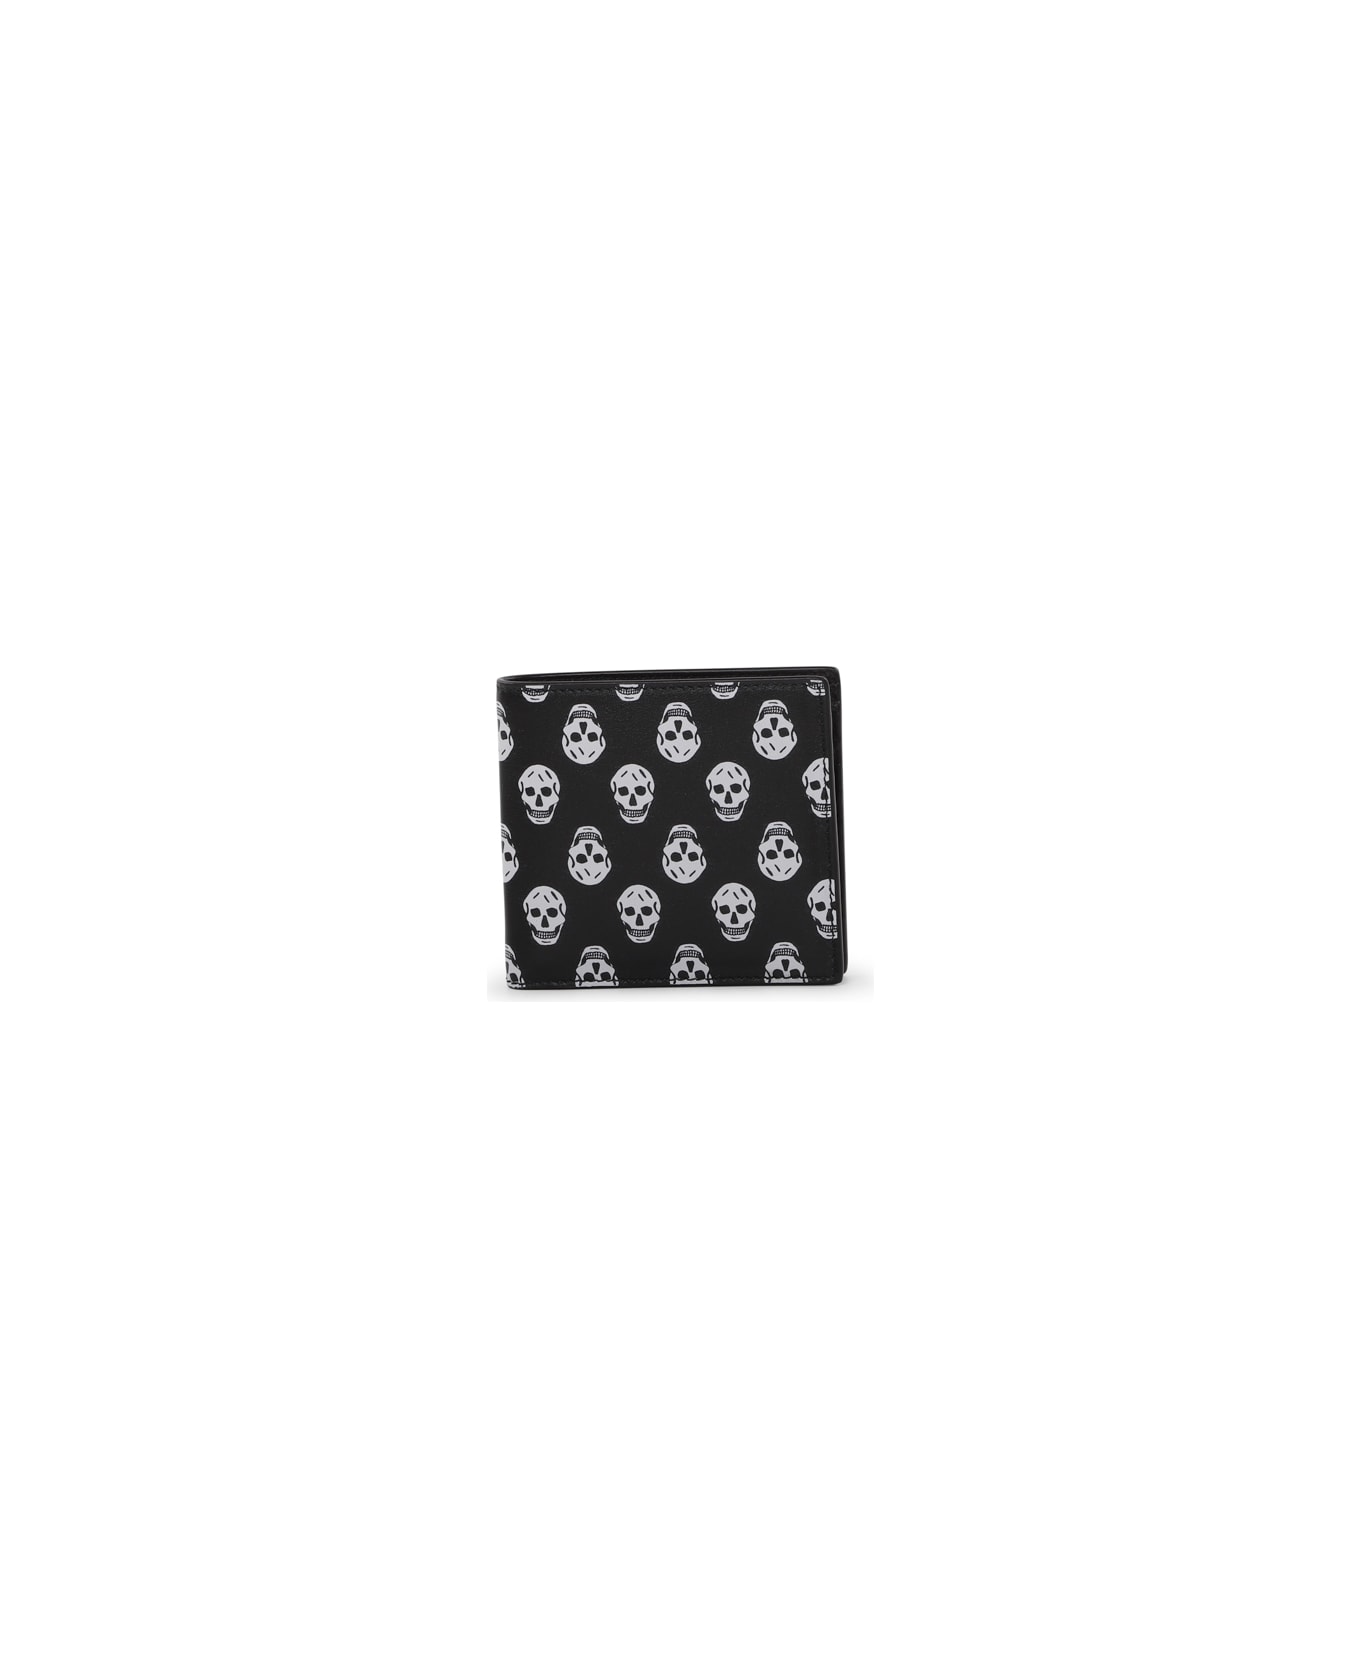 Alexander McQueen Leather Wallet With Skull Print - Black/white 財布